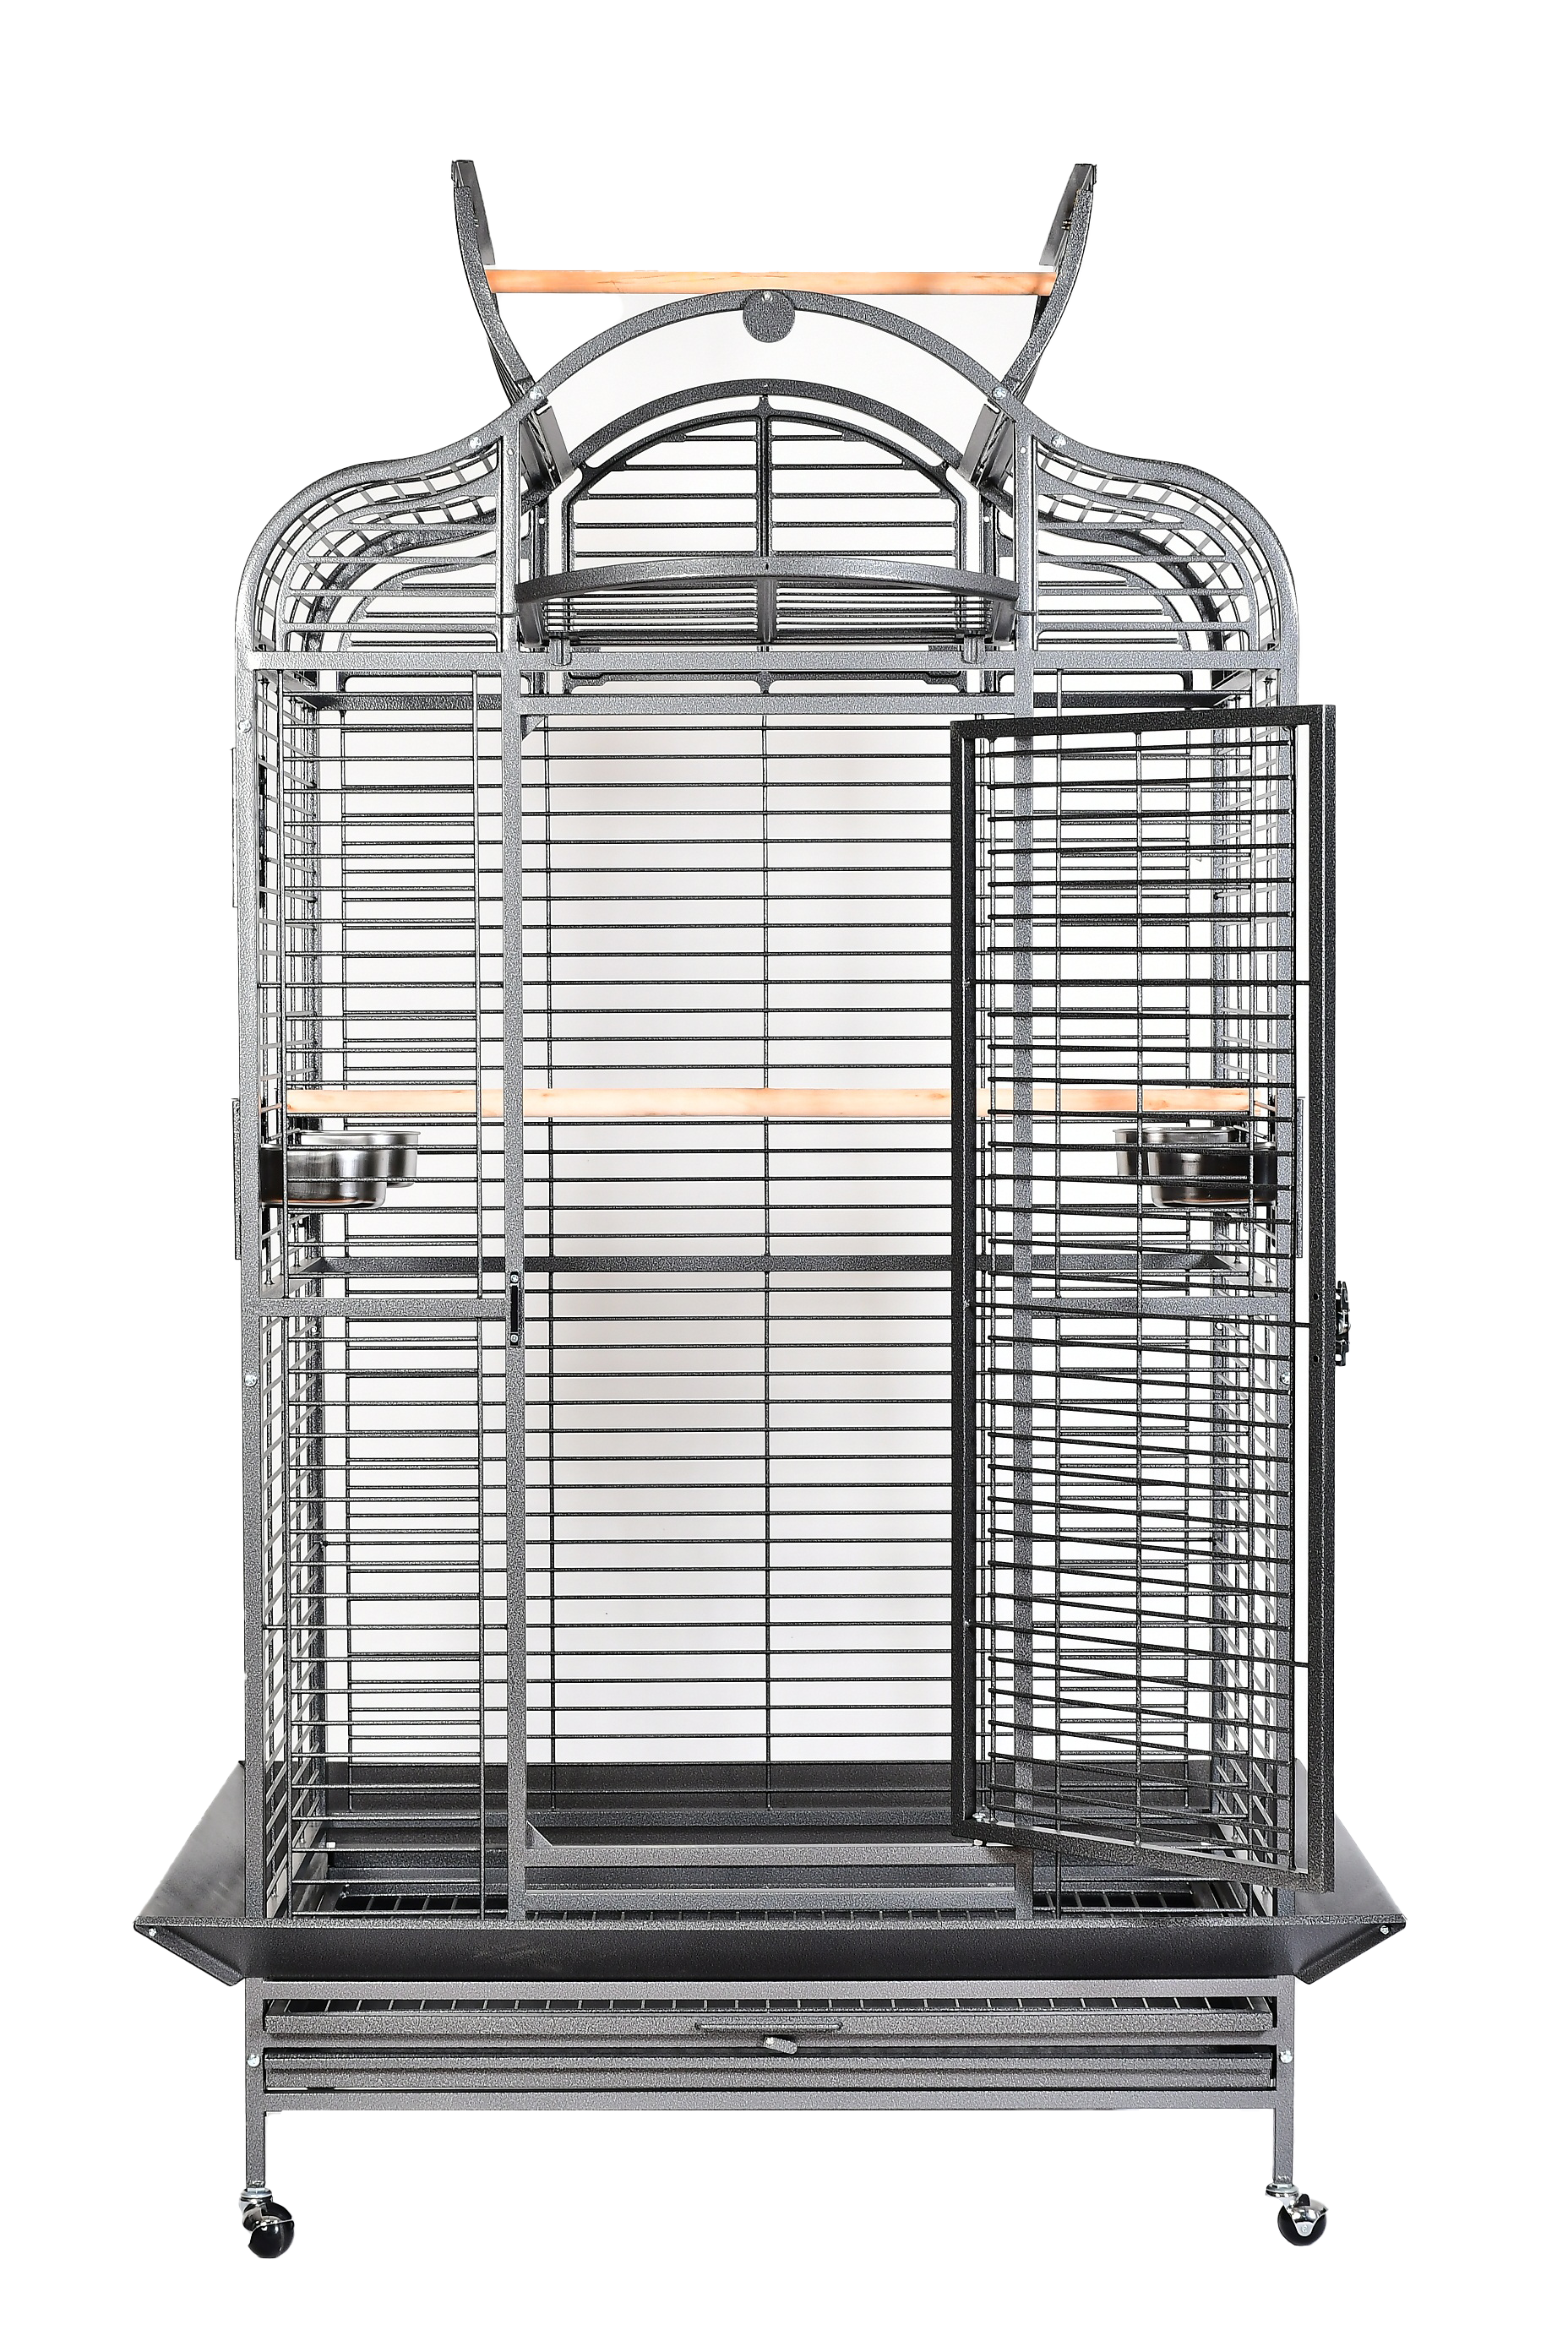 Majestic Parrot Cage - Spacious and Secure Home for Large Birds